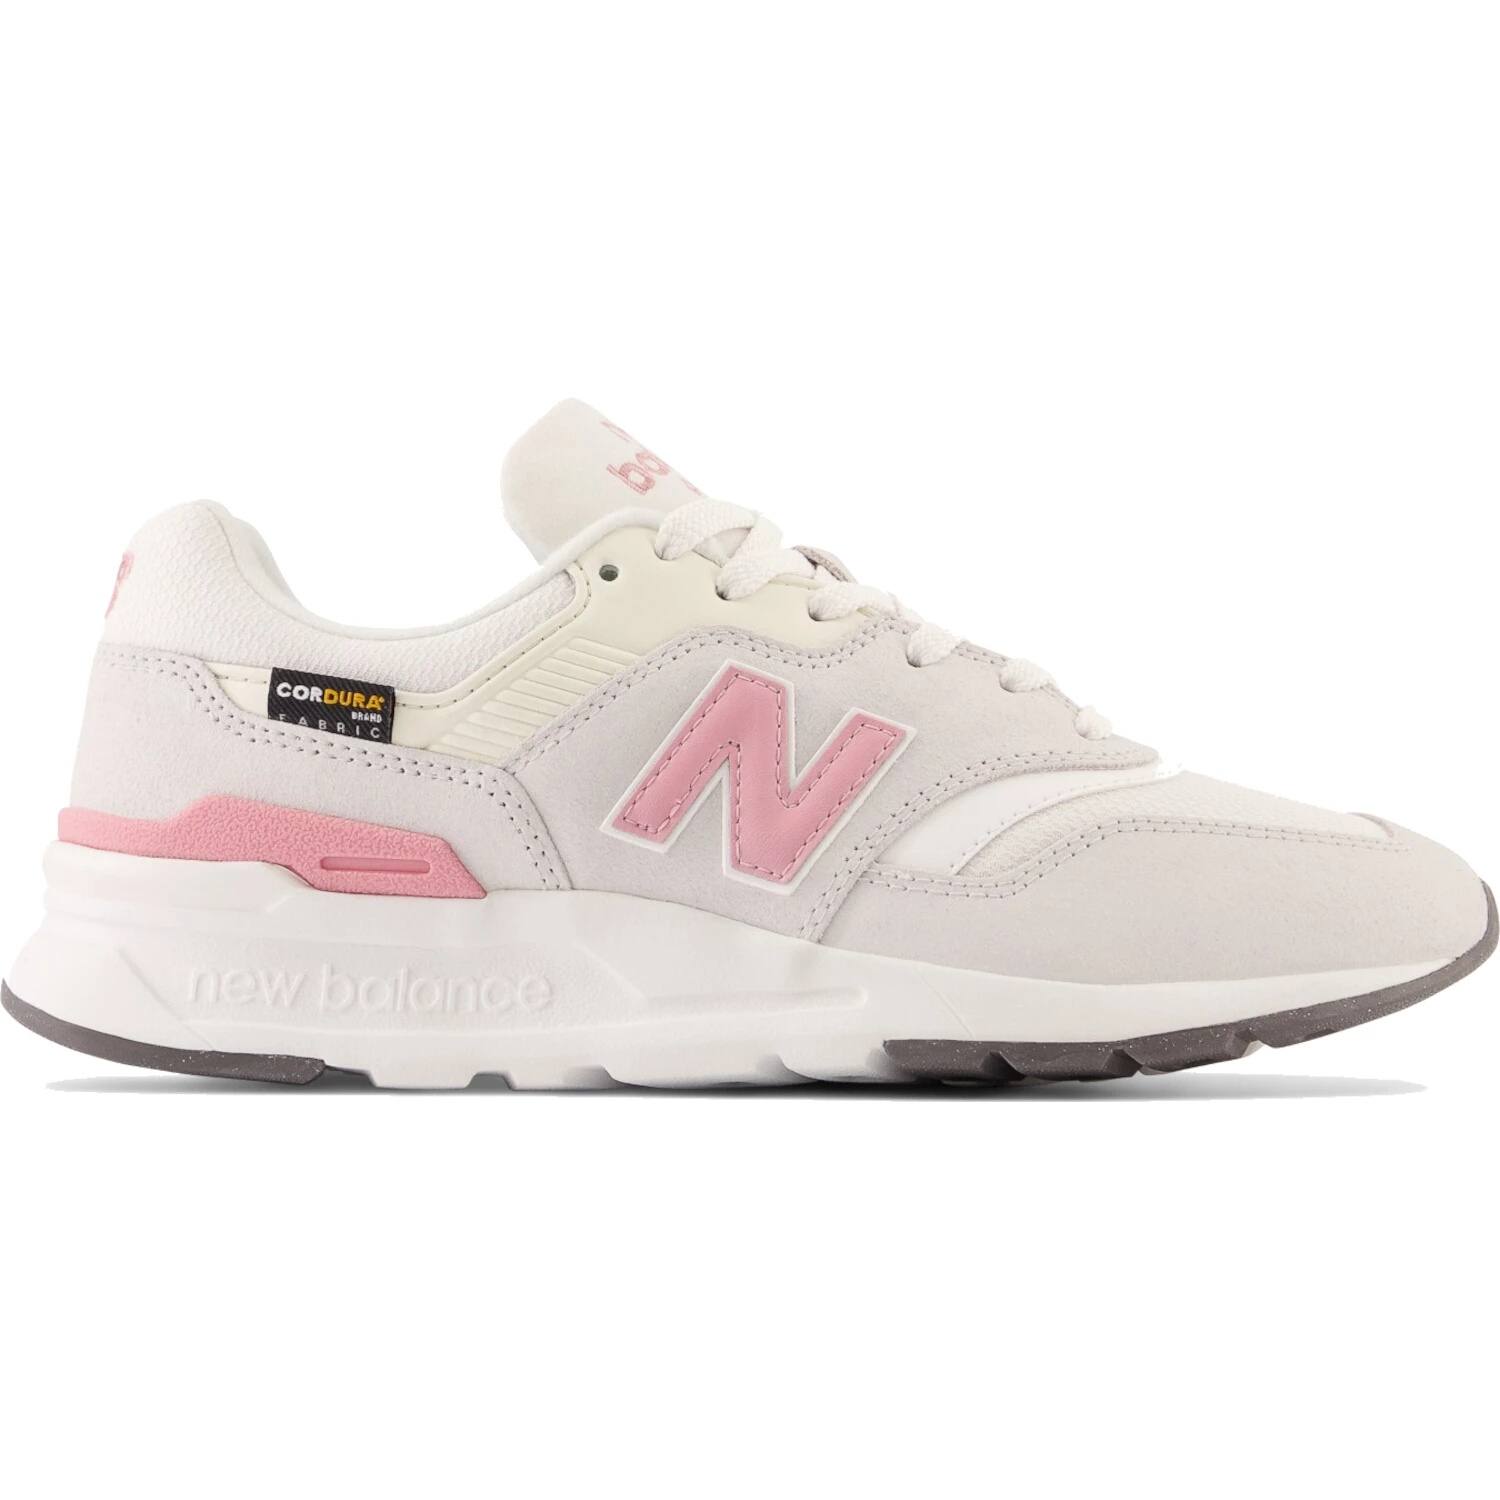 NEW BALANCE CW997 DAMES SNEAKERS CW997HSA wbsport.nl